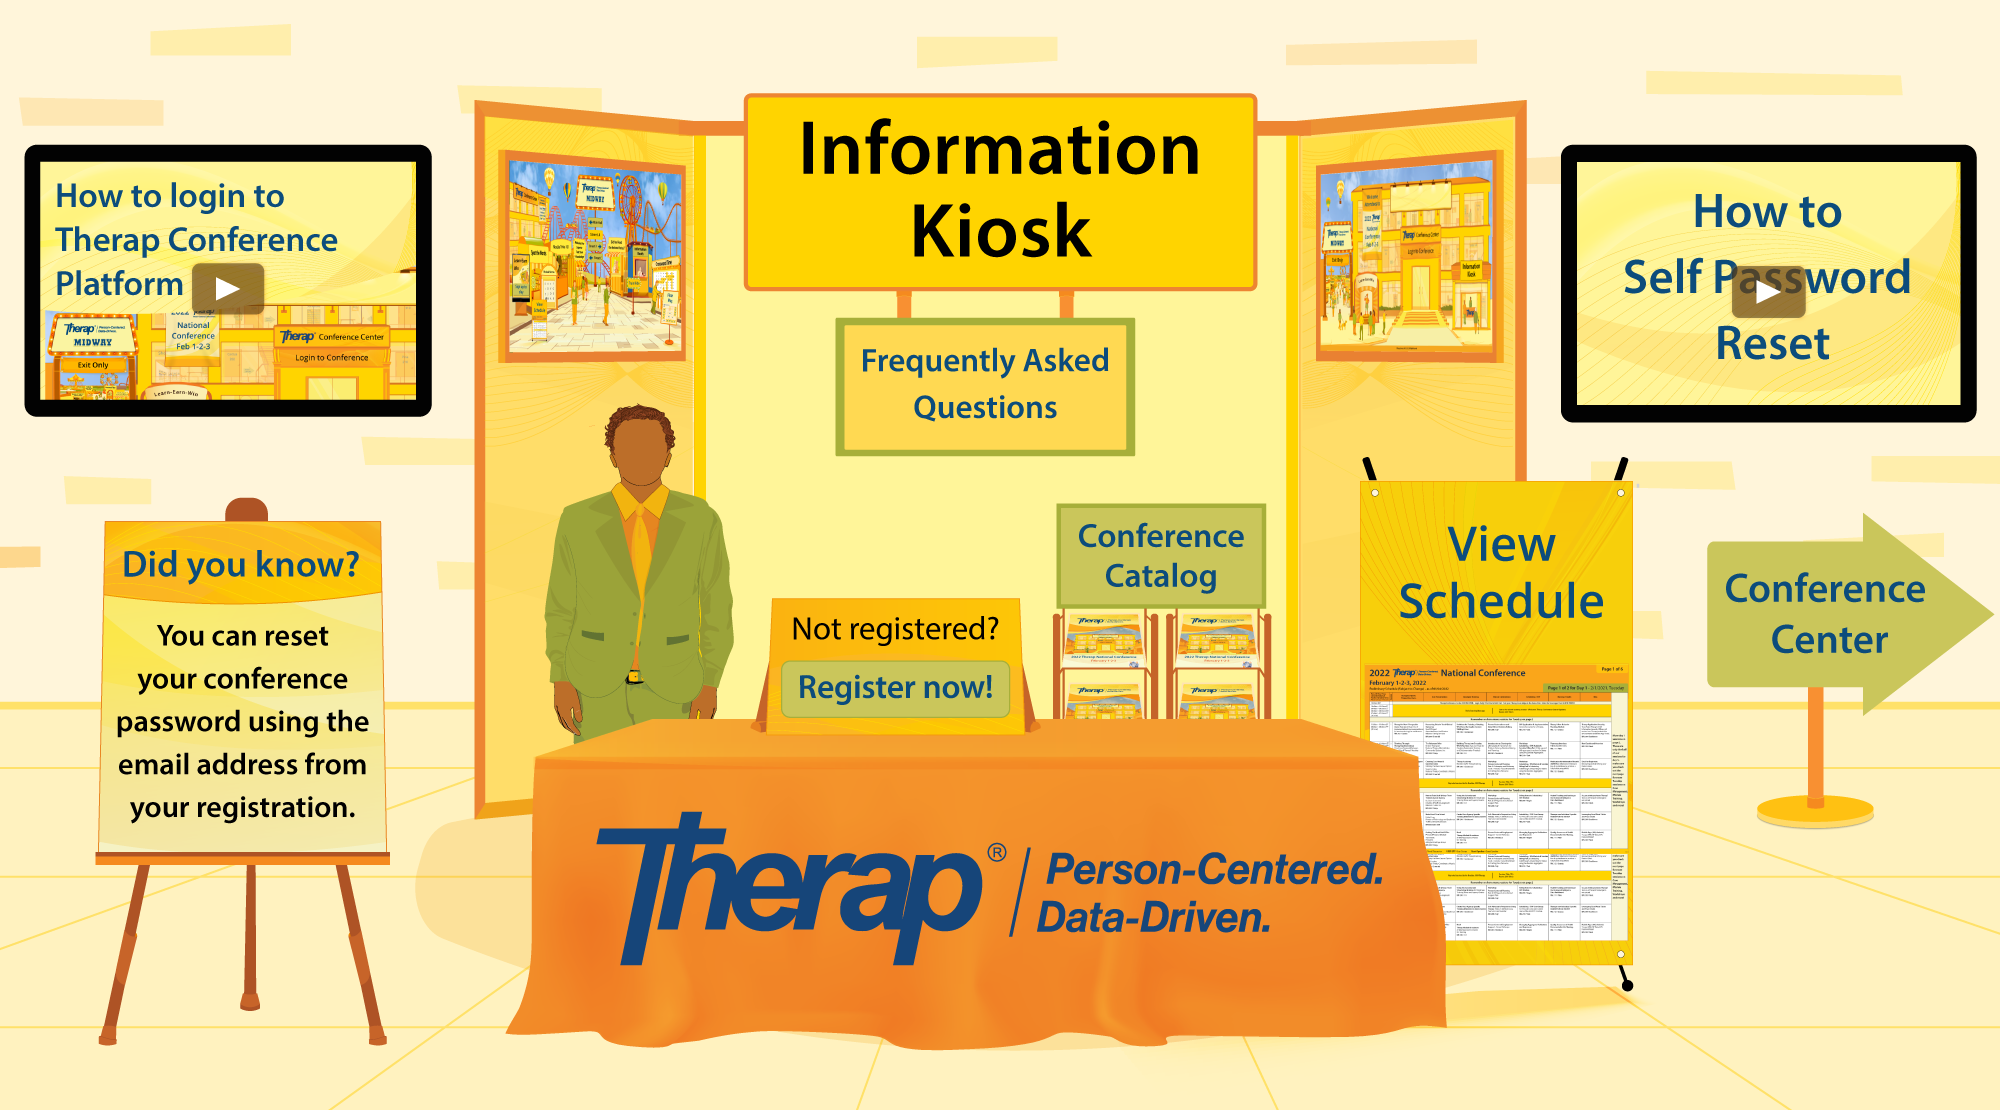 Welcome to information kiosk